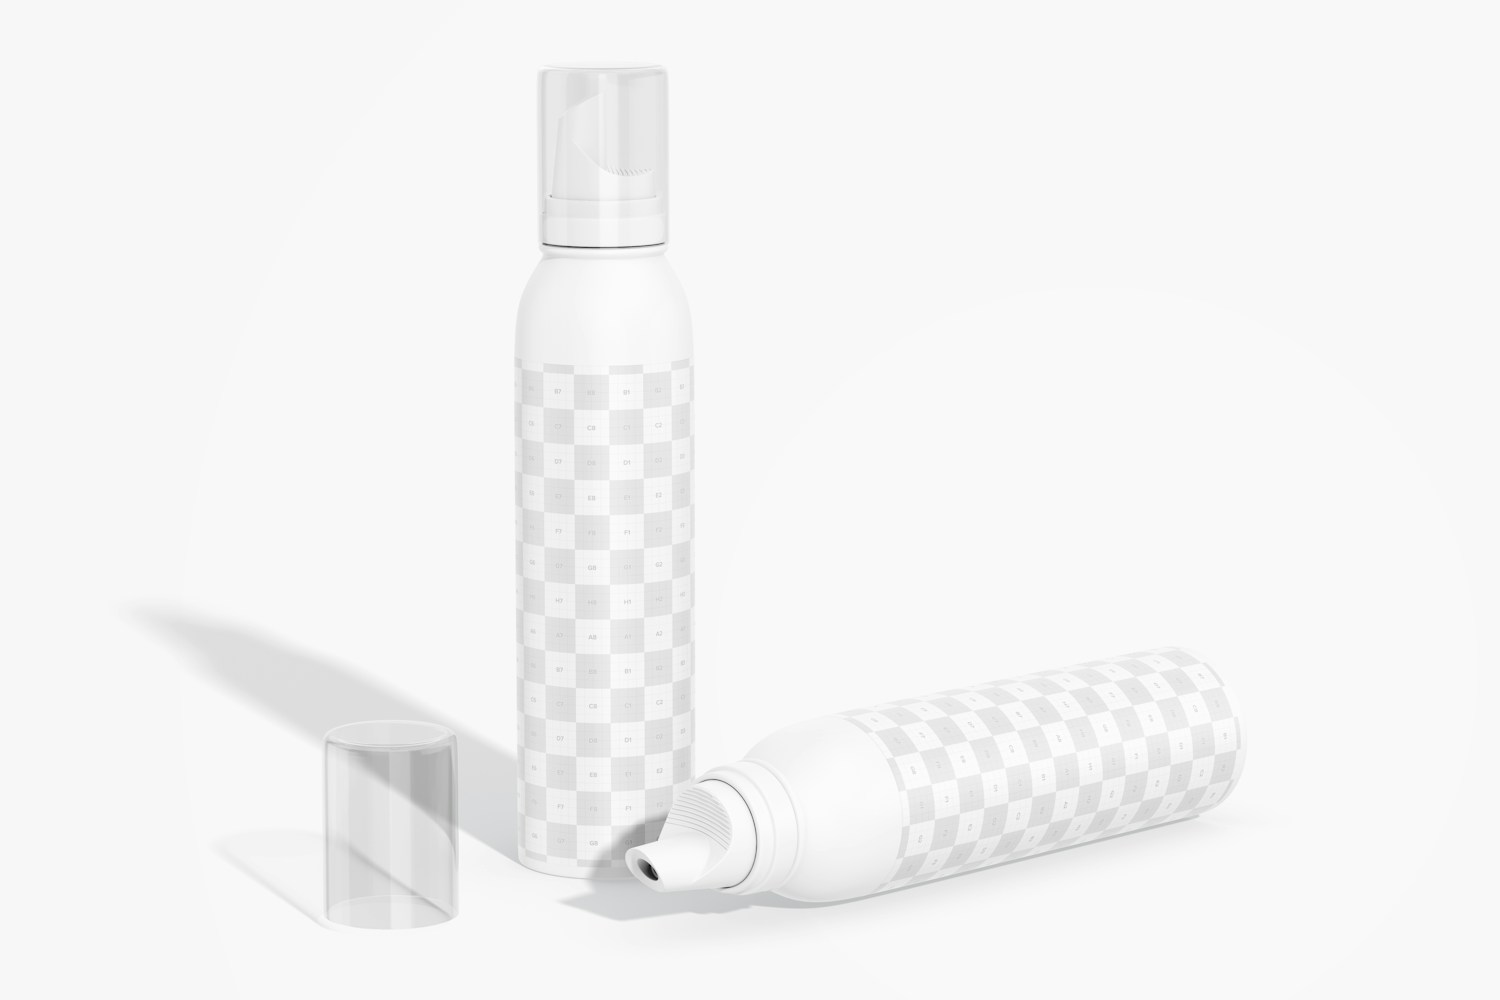 Hair Mousse Bottles Mockup, Standing and Dropped